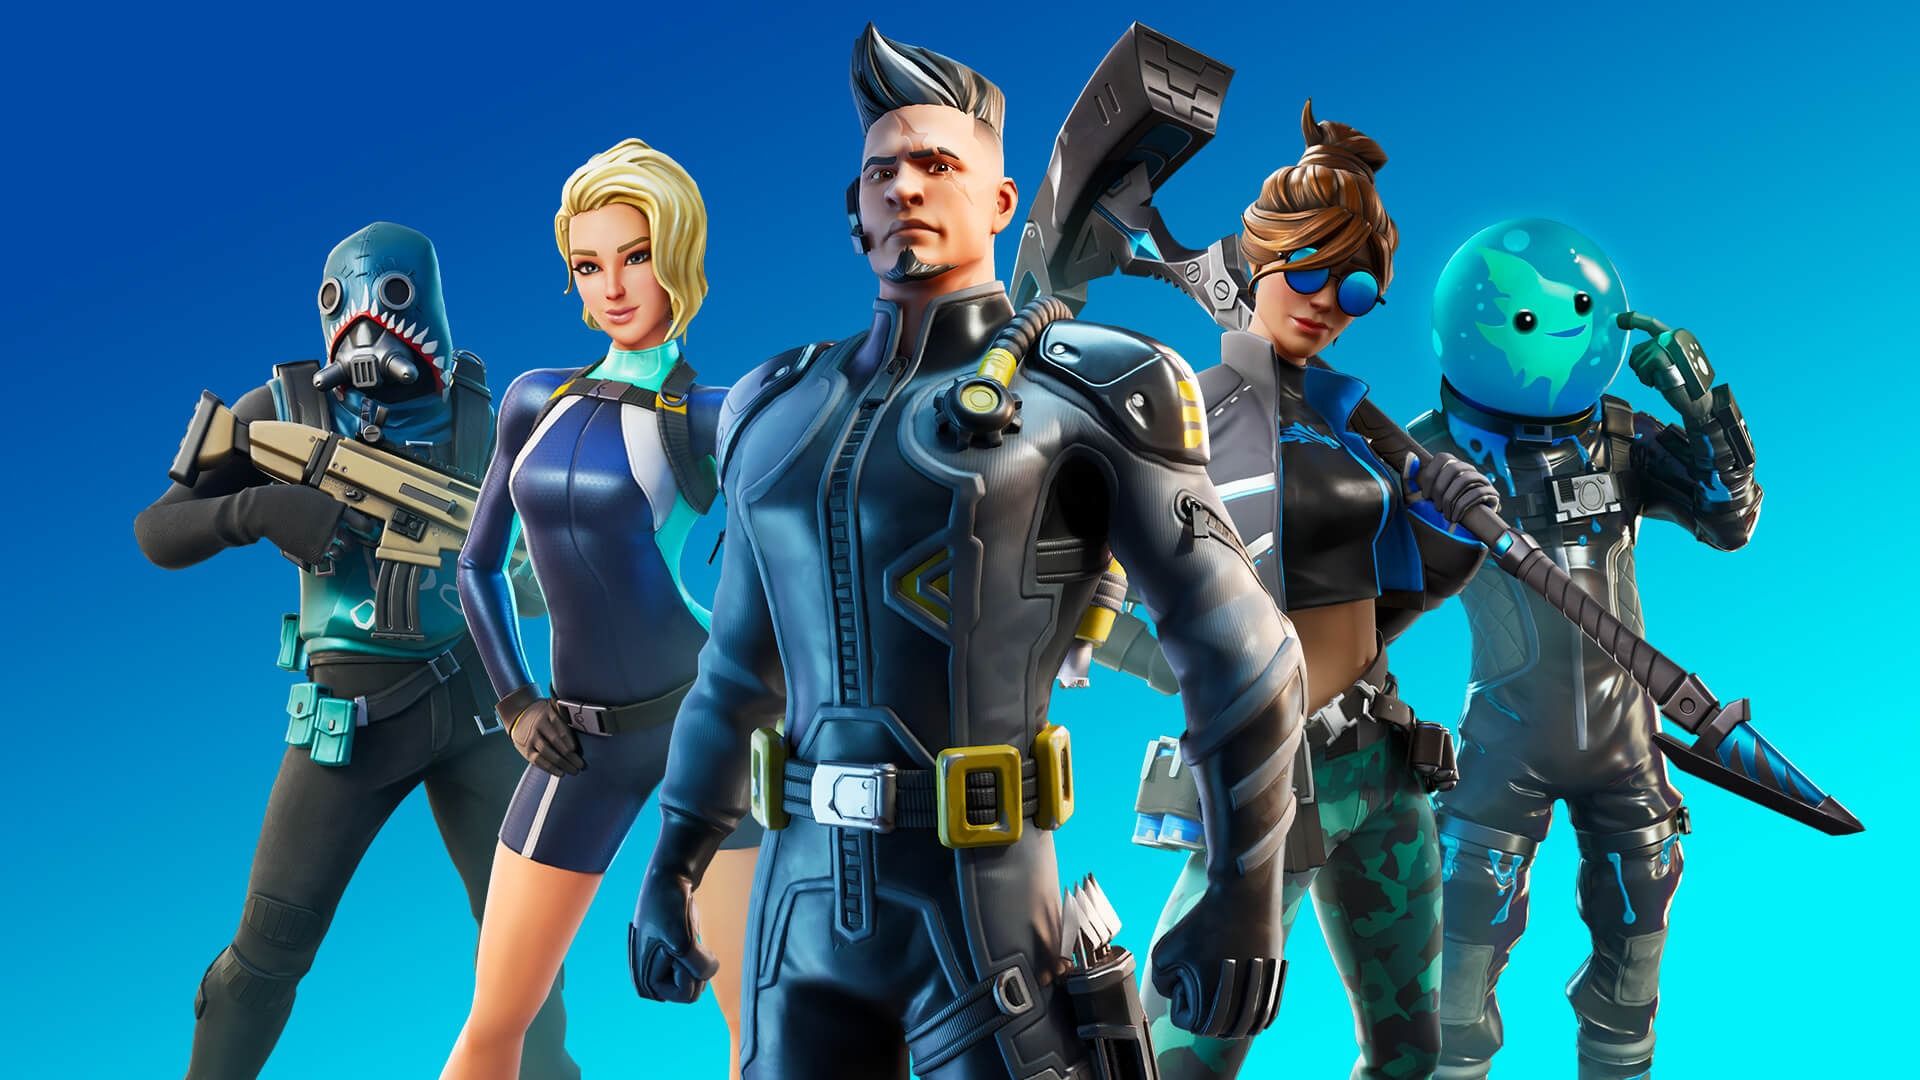 Let's learn how to get Among Us in Fortnite. It's finally here: Among Us items such as a new Back Ling and emote are now available to collect in Fortnite